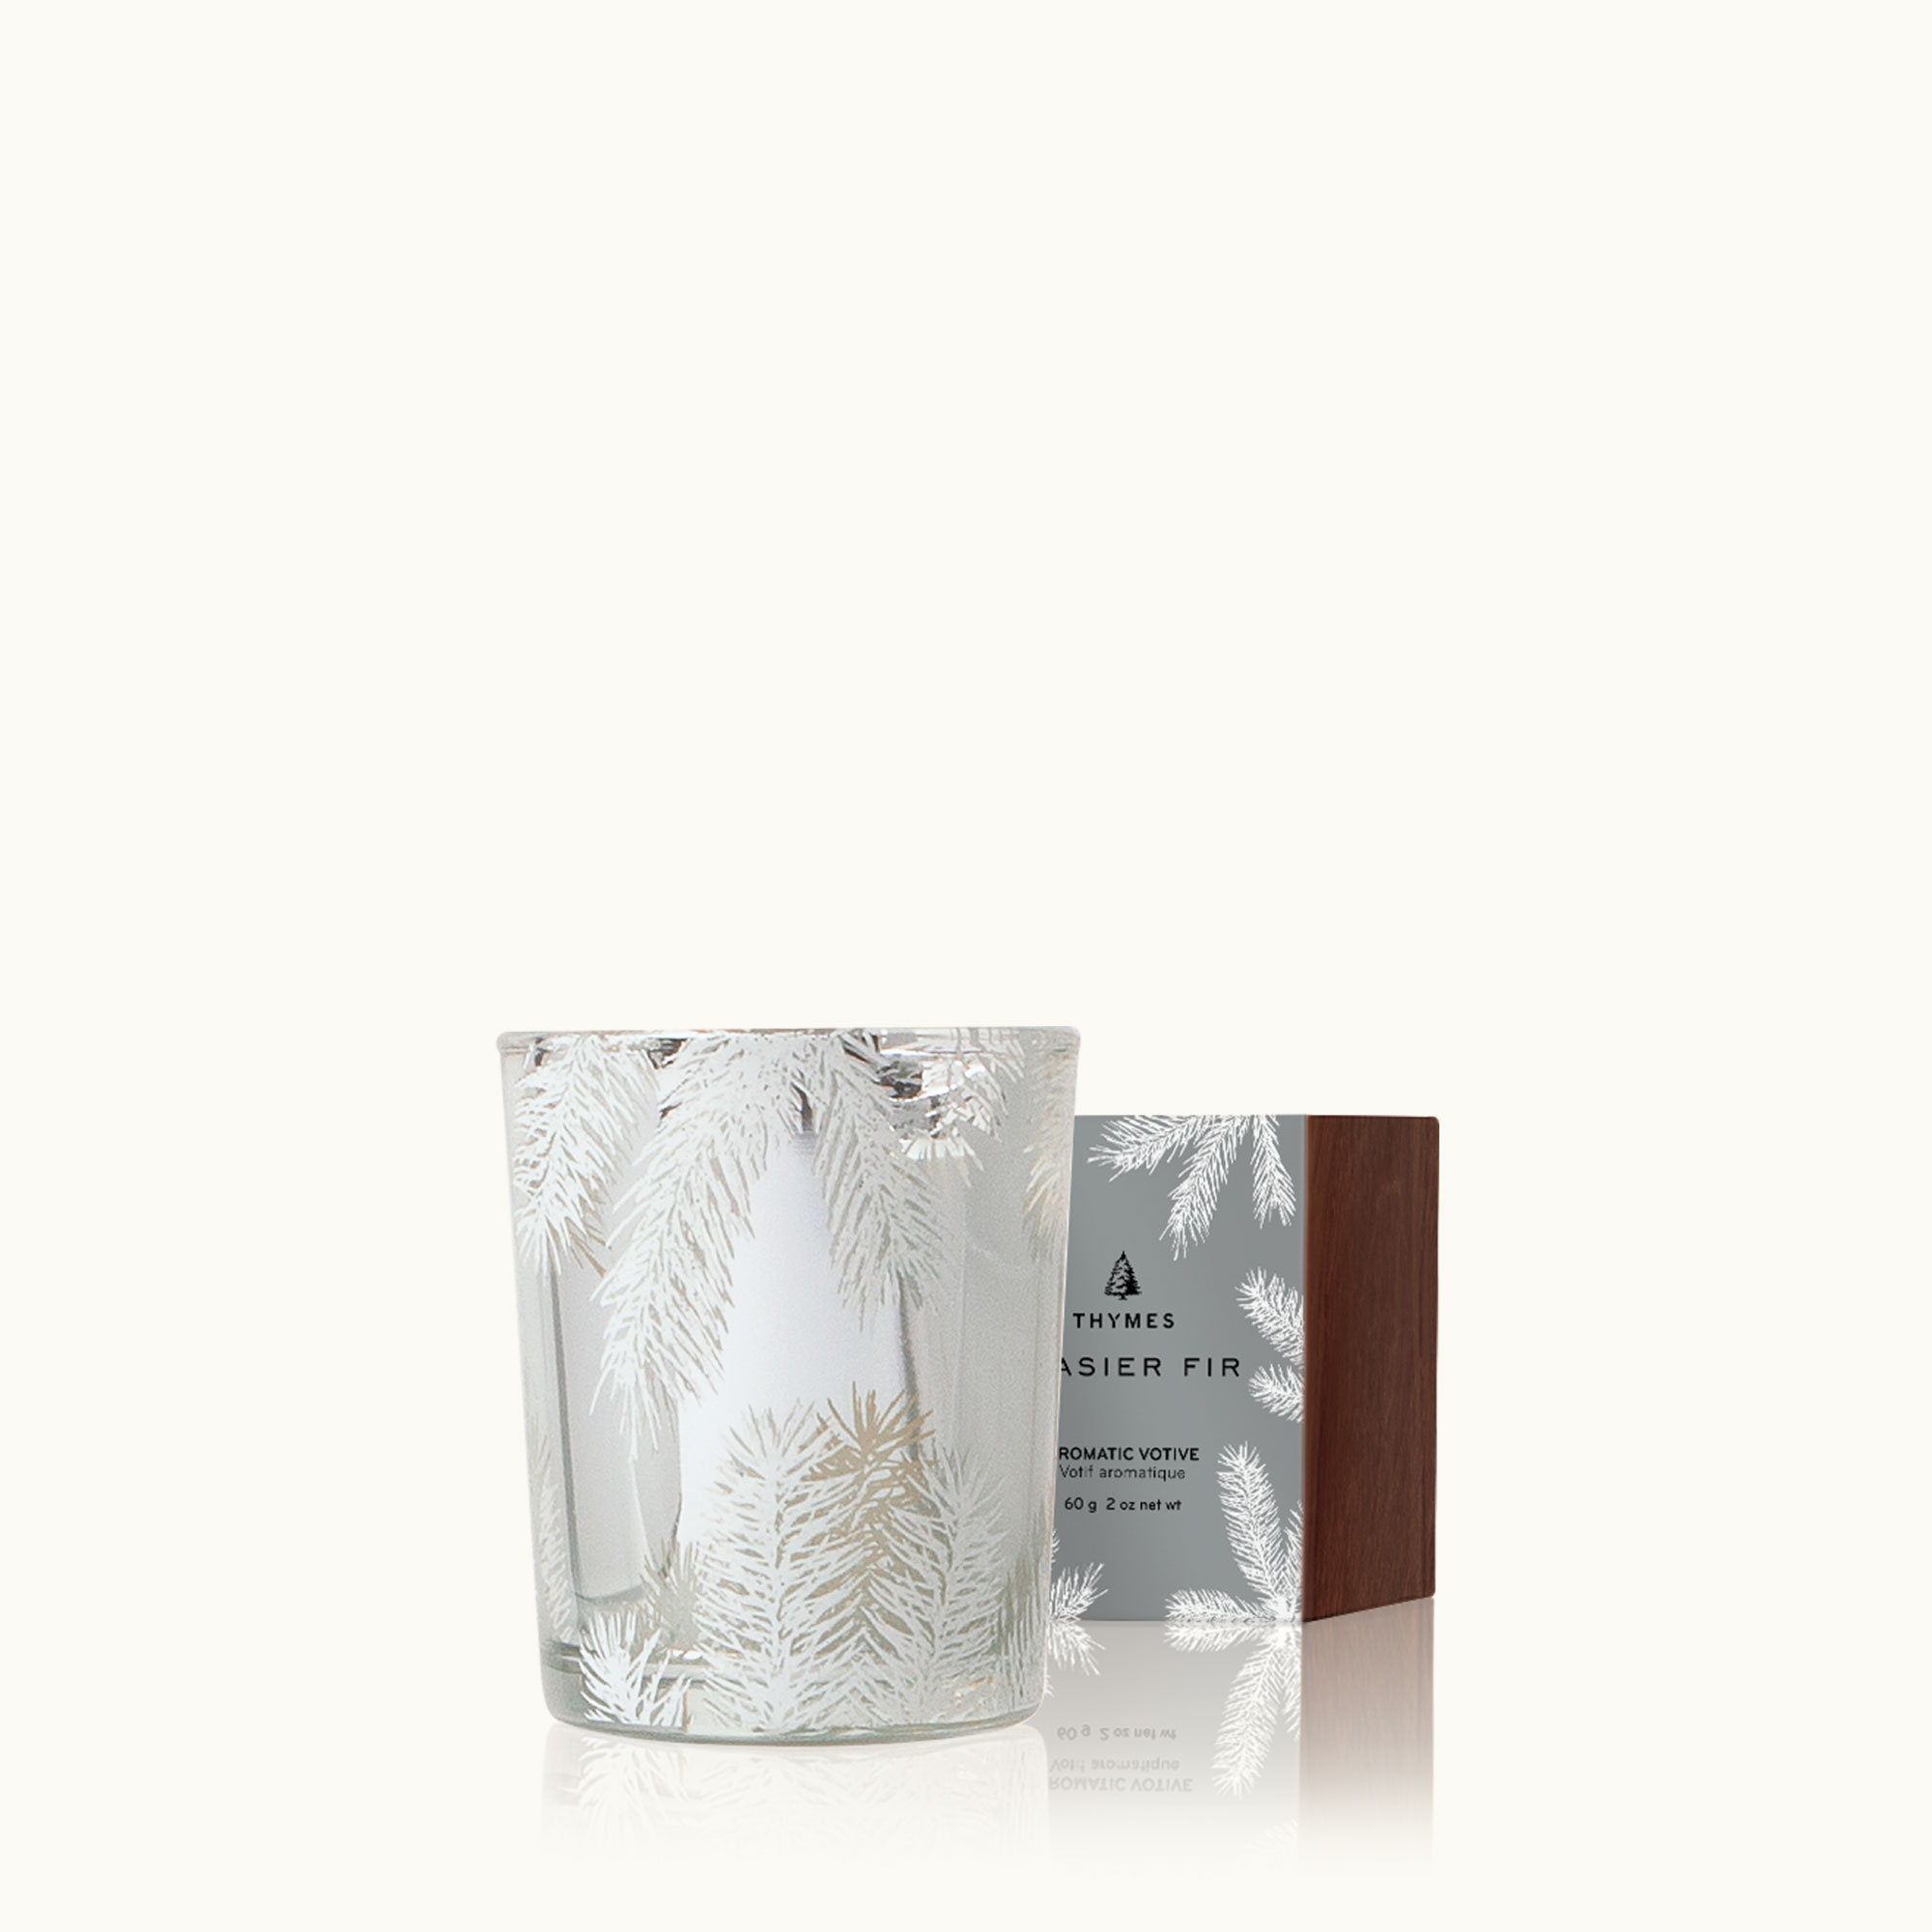 Thymes Frasier Fir Votive Candle Set – To The Nines Manitowish Waters